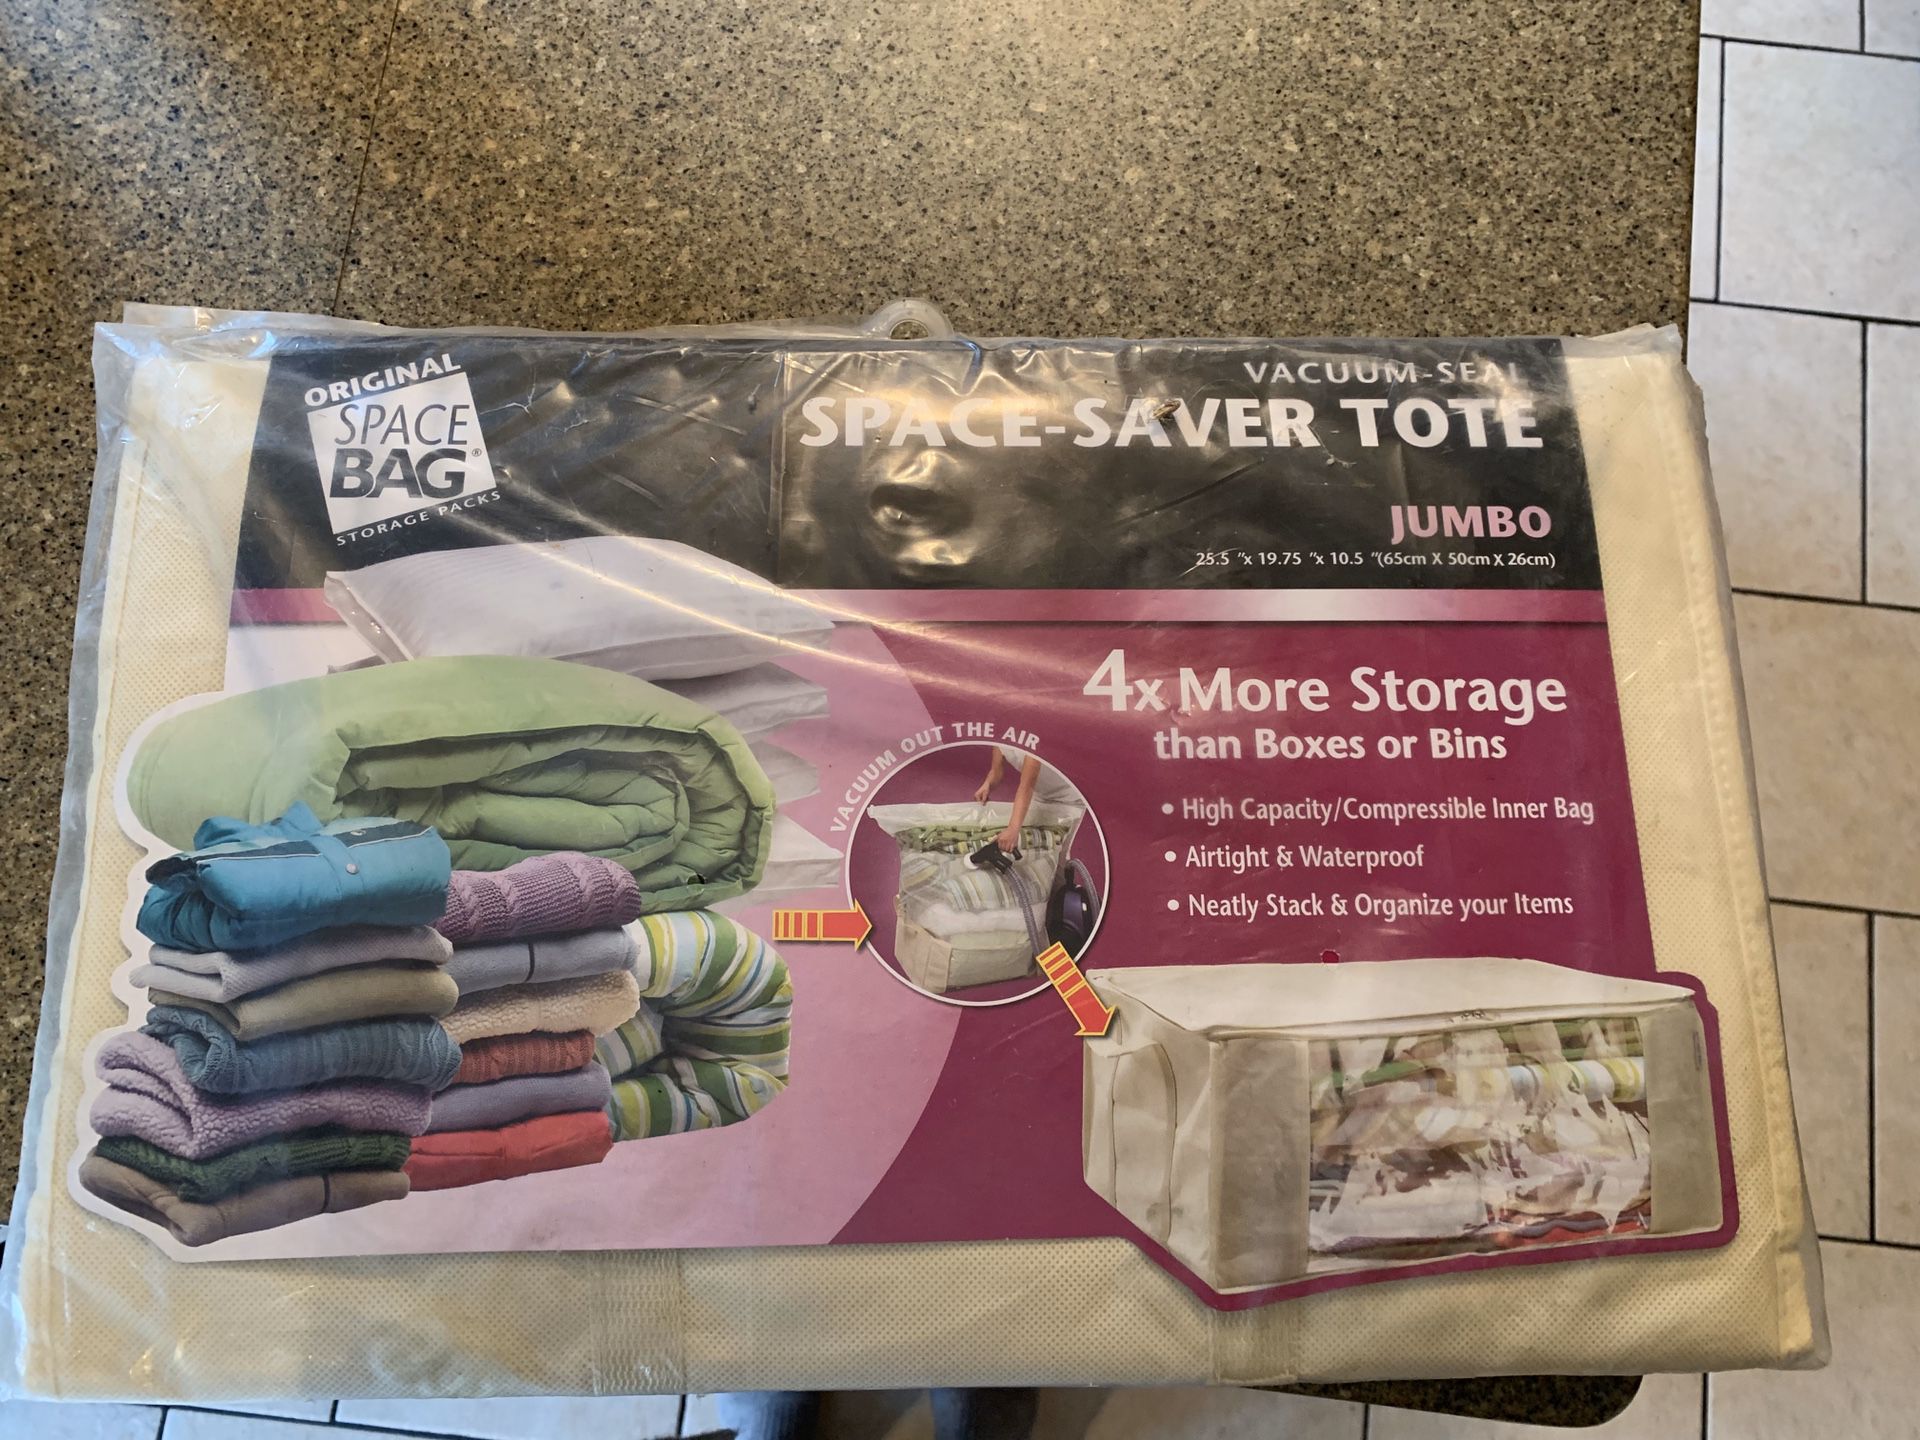 Vacuum sealed space saver tote jumbo size new in package. $5